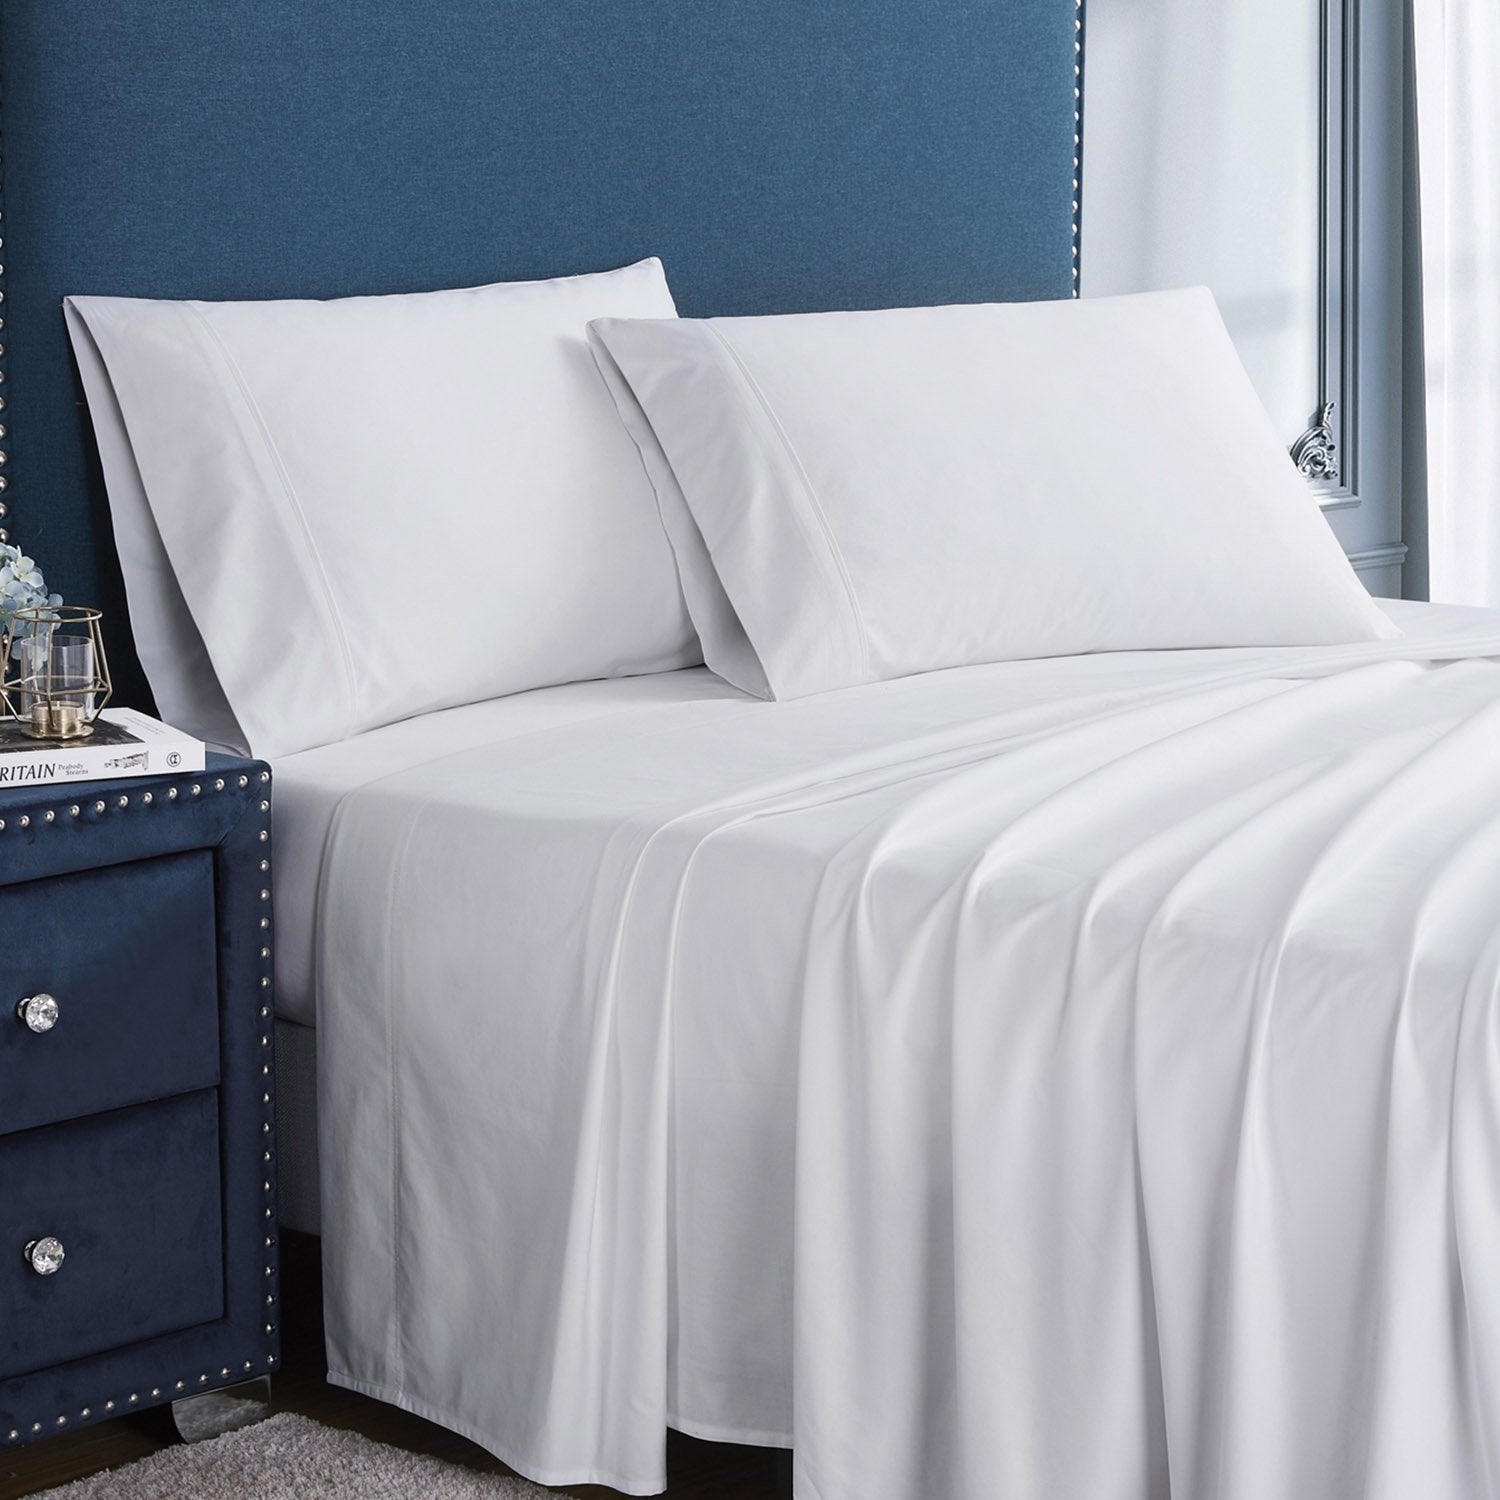 400 Thread Count Cotton Bed Sheet Set White - Bed